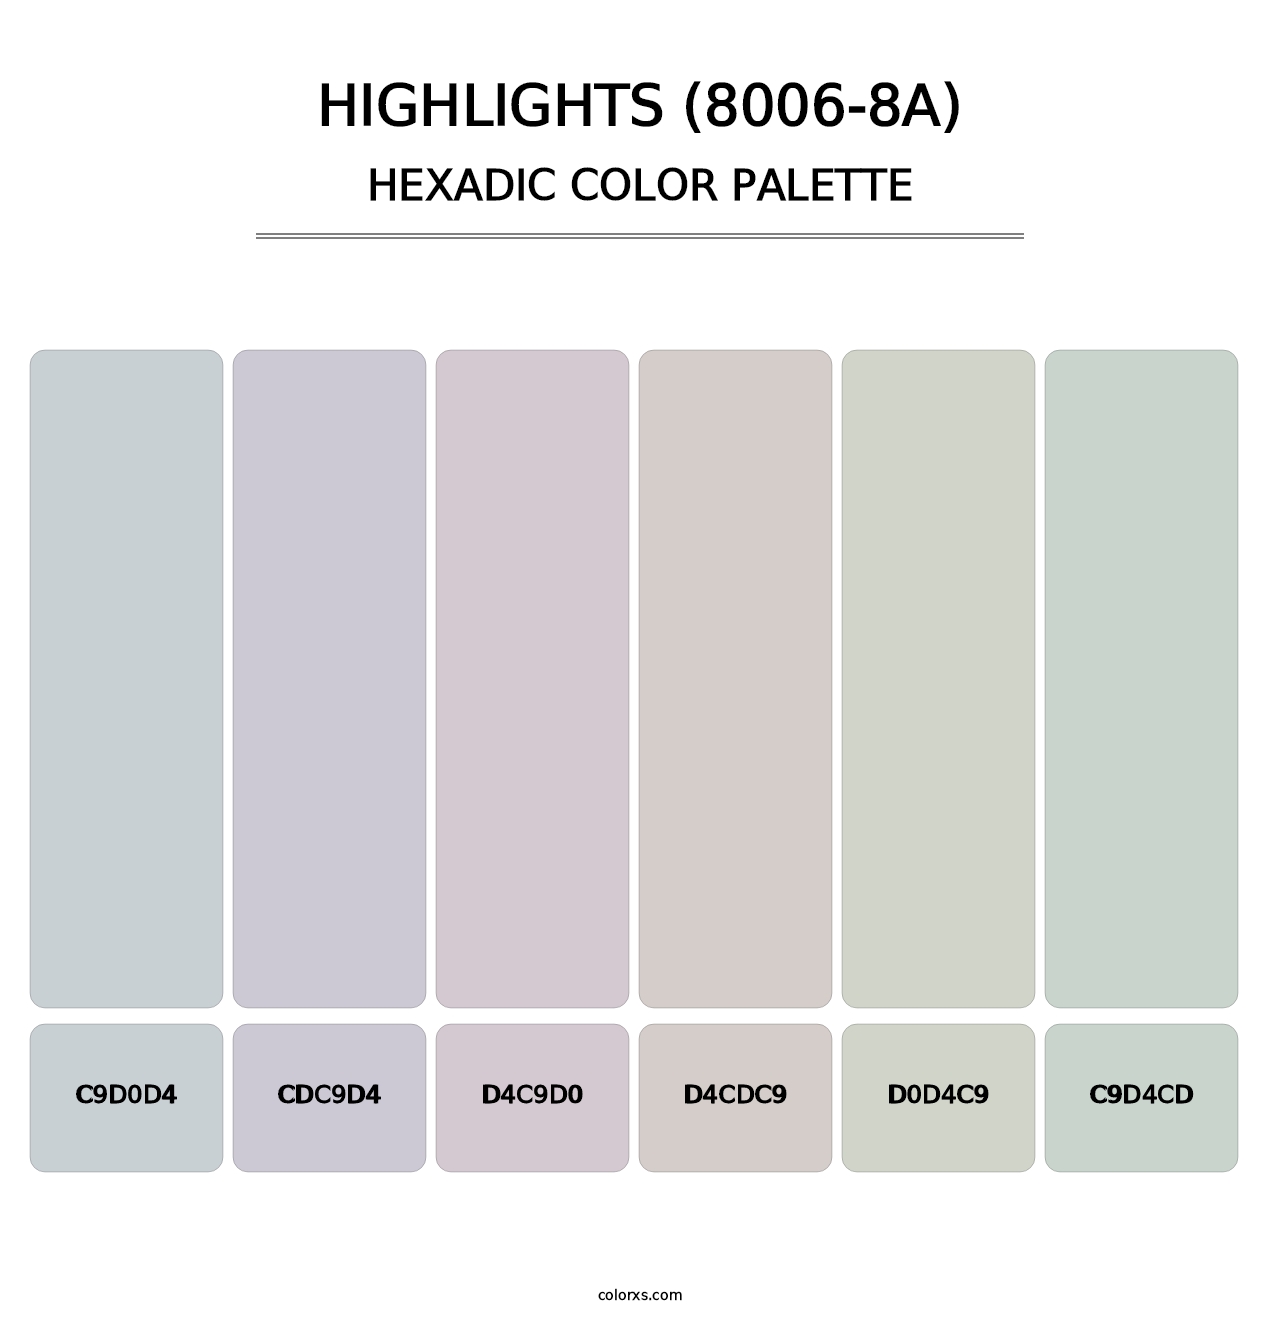 Highlights (8006-8A) - Hexadic Color Palette